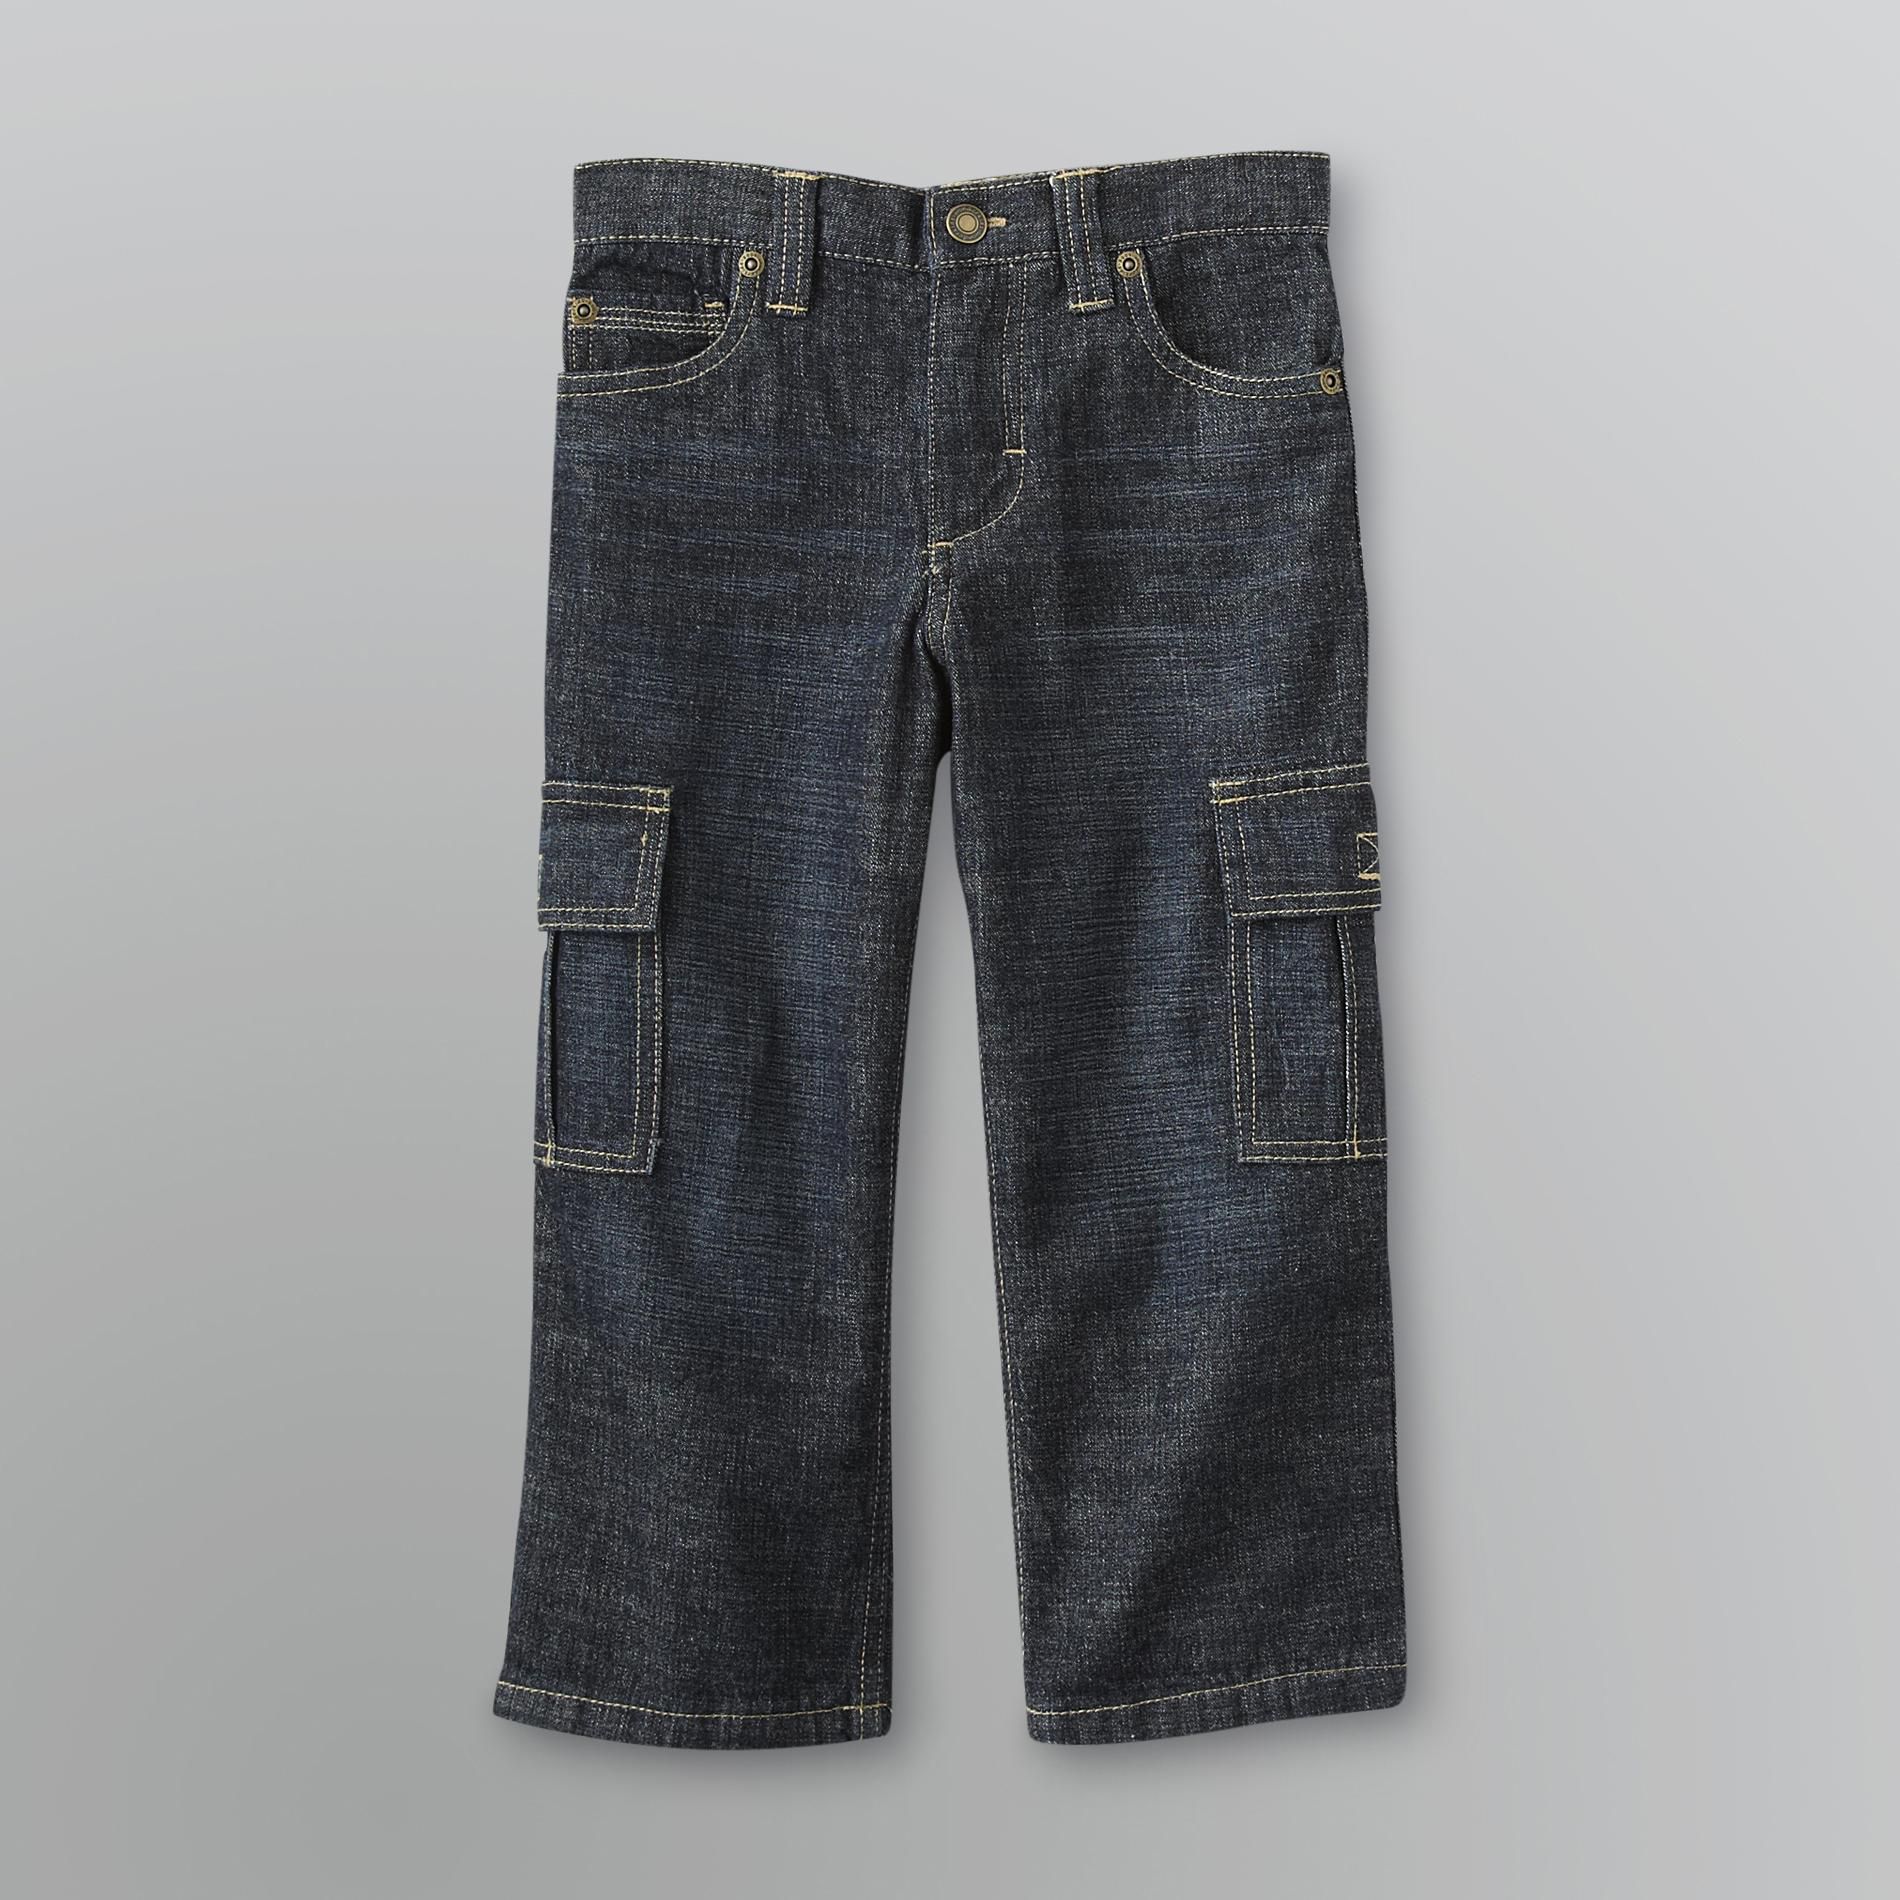 WonderKids Infant & Toddler Boy's Relaxed Fit Cargo Jeans